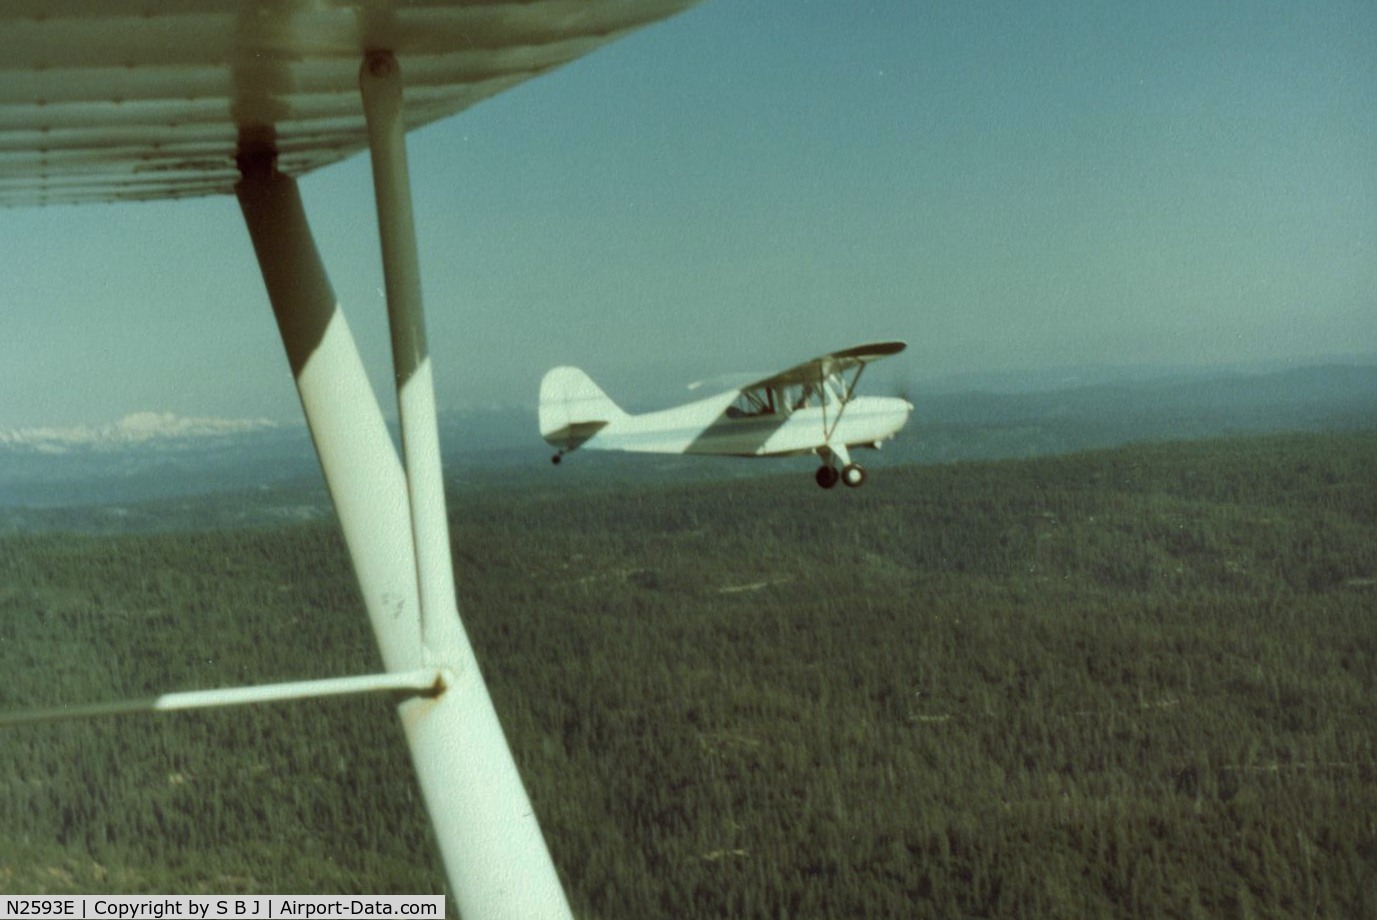 N2593E, 1946 Aeronca 7AC Champion C/N 7AC-6175, 93E with 78E as we fly west near Placerville,Ca. returning from Carson City,Nv. This was the day I decided to sell 93E.My old Chief 78E (owned 3 times)badly outperformed 93E which I found disappointing.The Sierras do test an airplane!!!